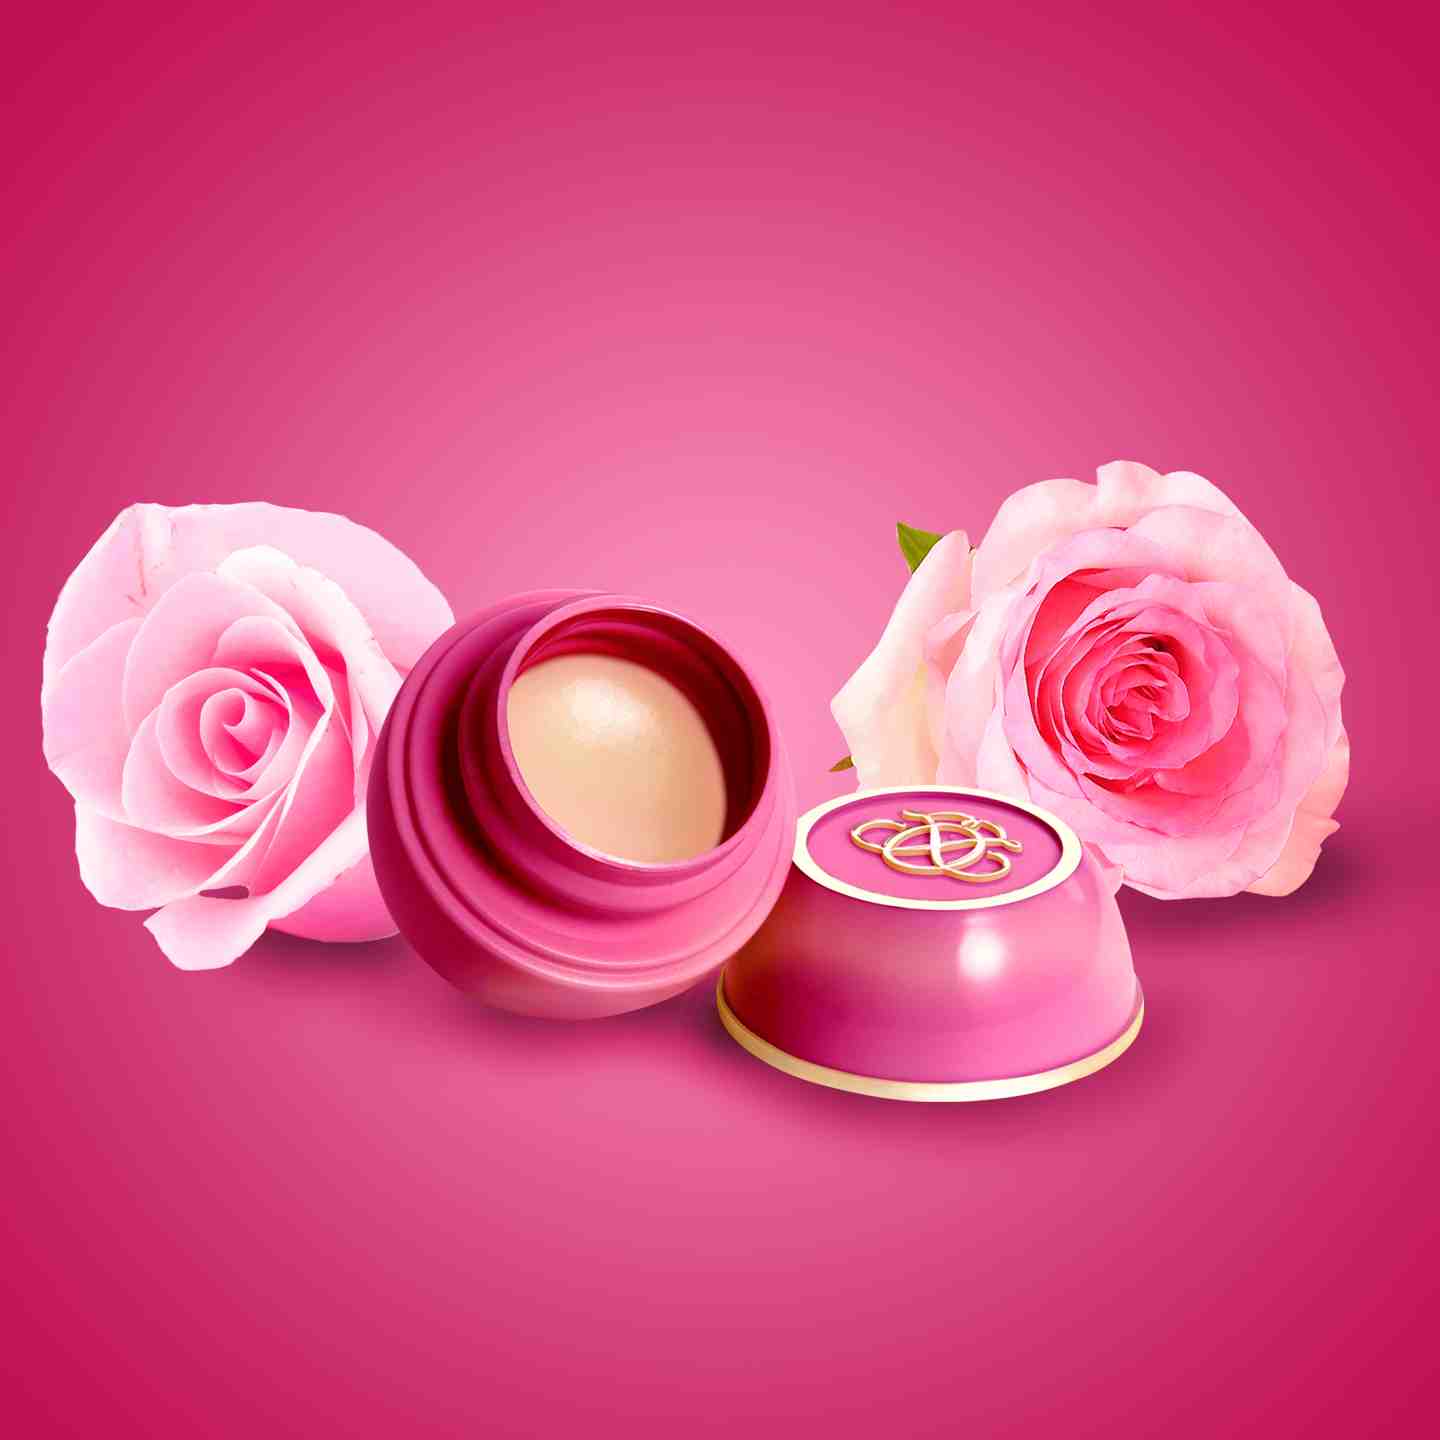 Oriflame Uyo - DO YOU KNOW YOU CAN USE TENDER CARE BALM ON